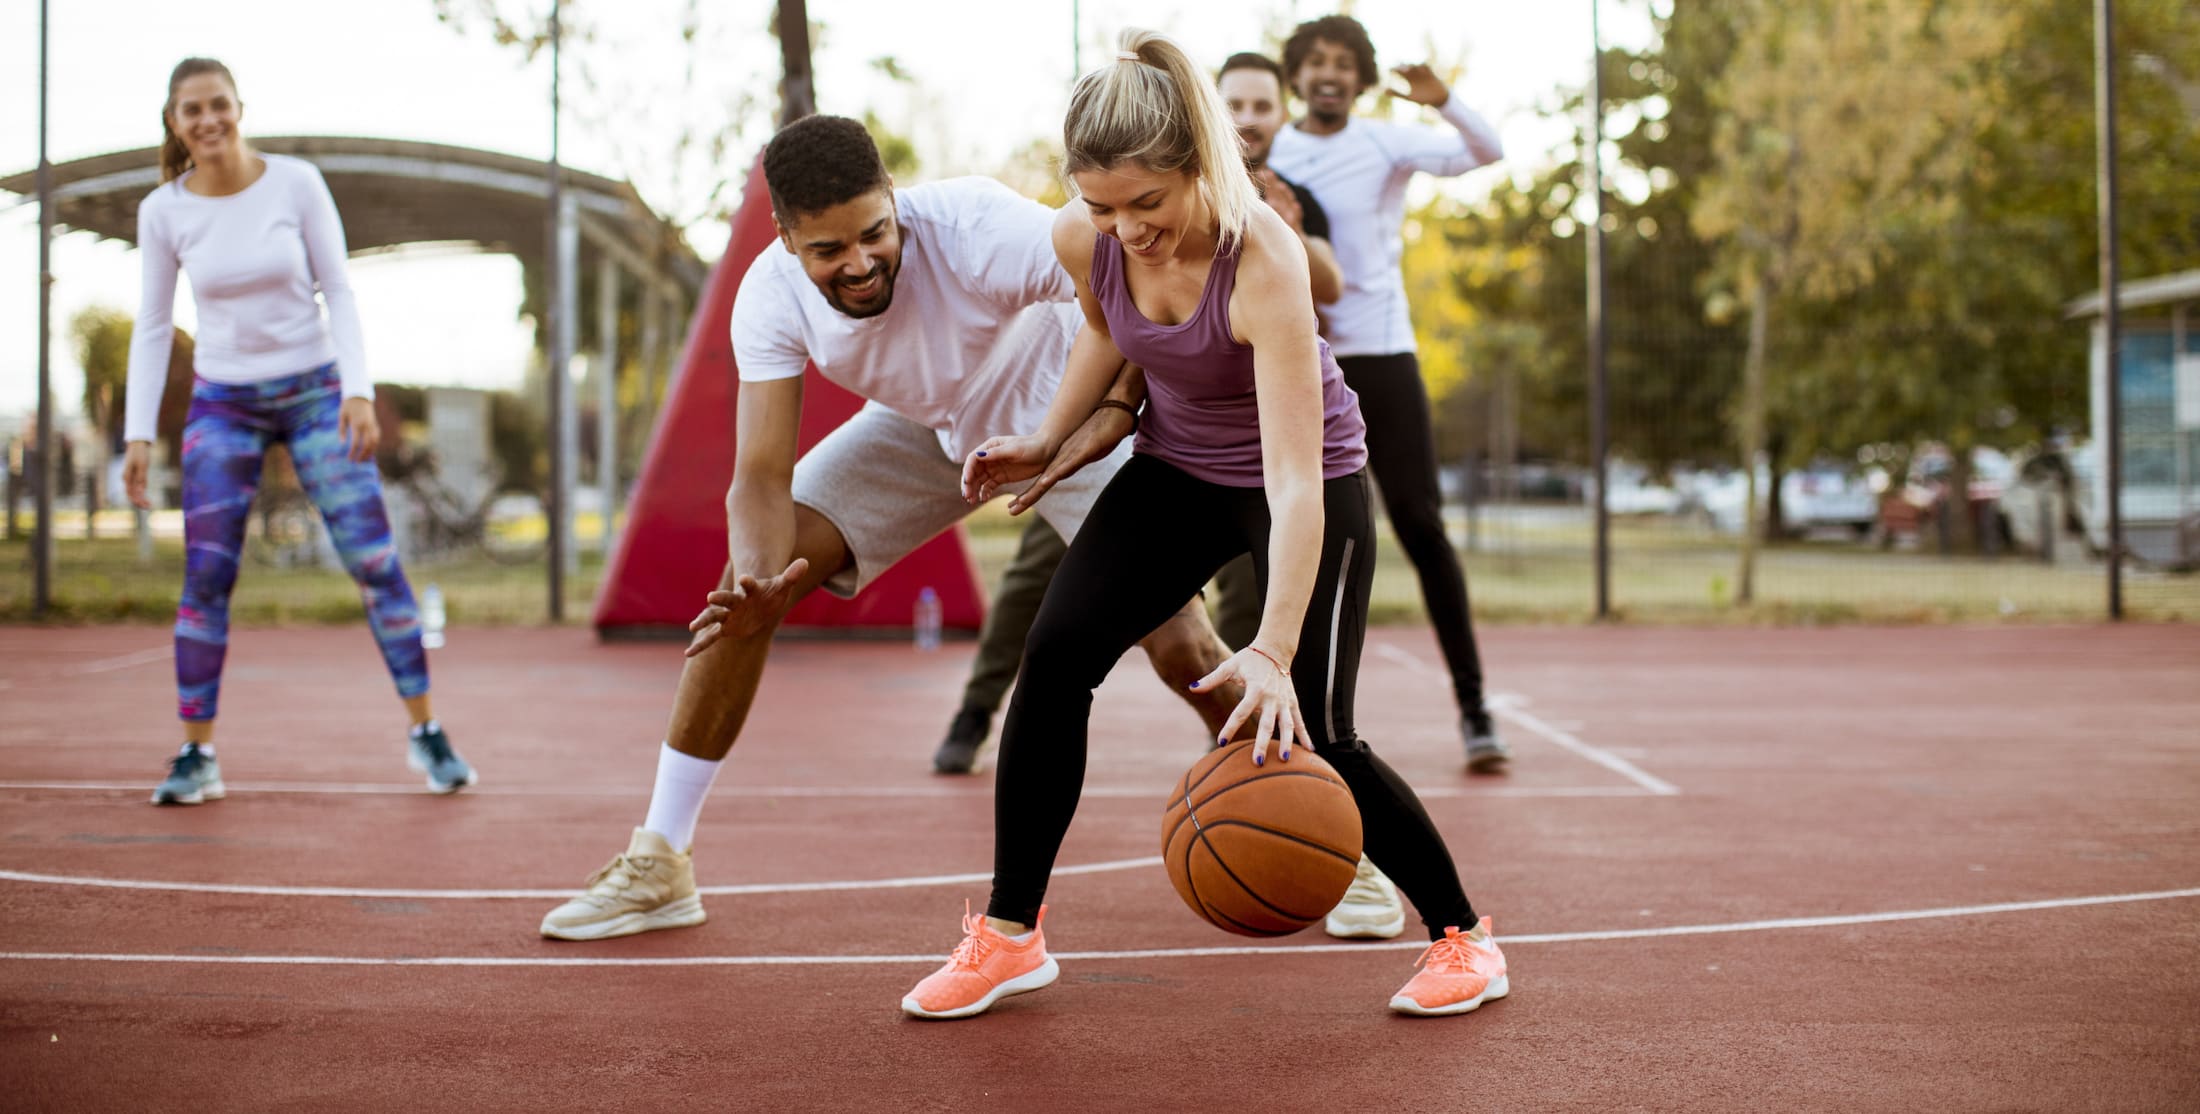 Friends playing basketball on an outdoor court